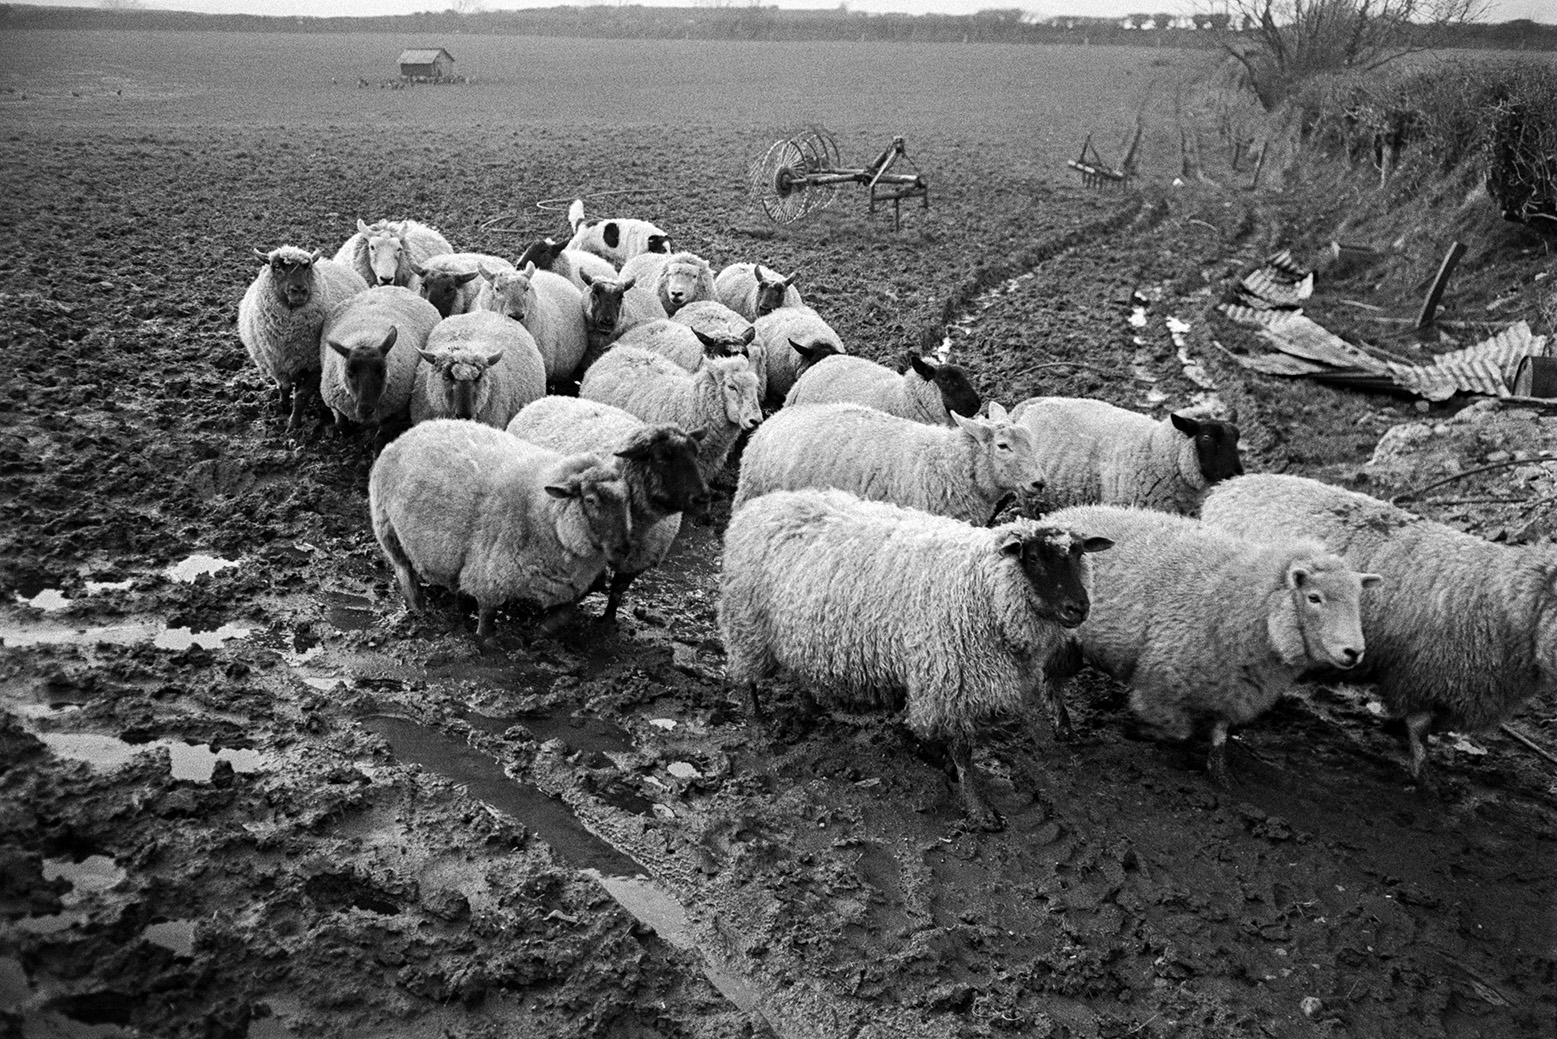 Sheep being herded out of a muddy field at Mill Road Farm, Beaford. Sheets of corrugated iron and farm machinery can be seen in the background. The farm was also known as Jeffrys.